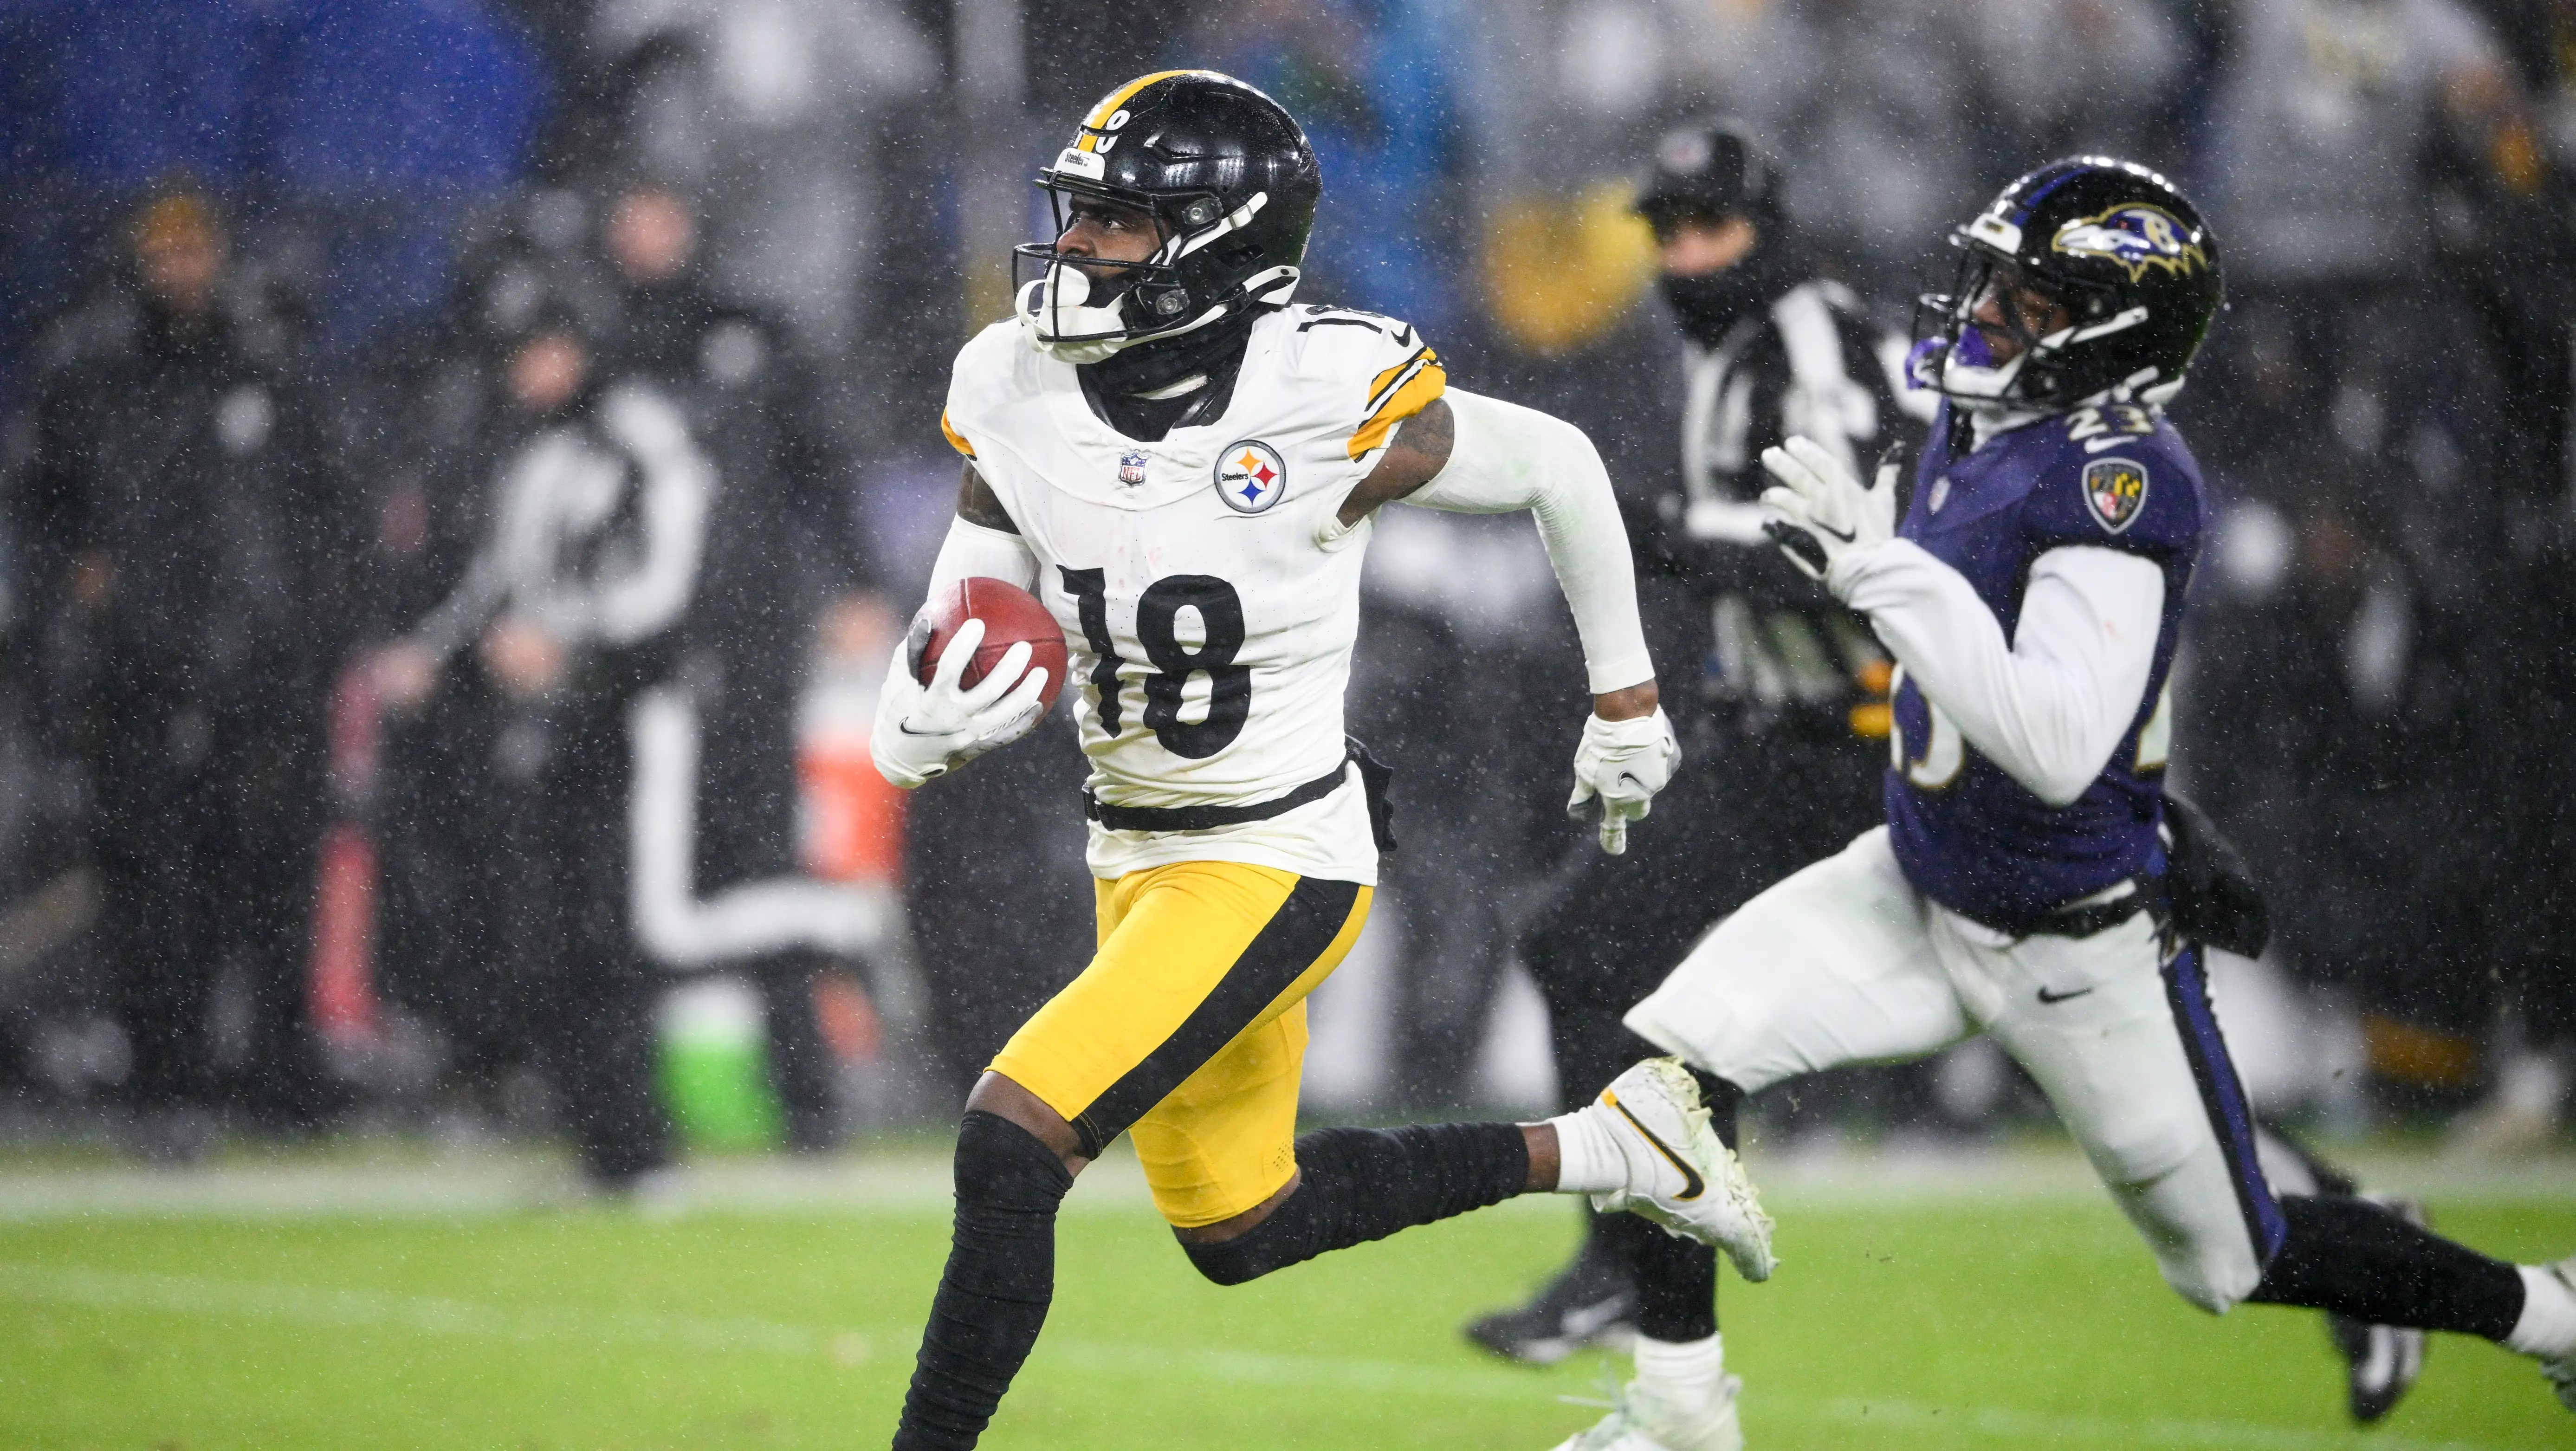 Pittsburgh Steelers defeat Baltimore Ravens and aim for playoffs with Buffalo Bills or Jaguars loss